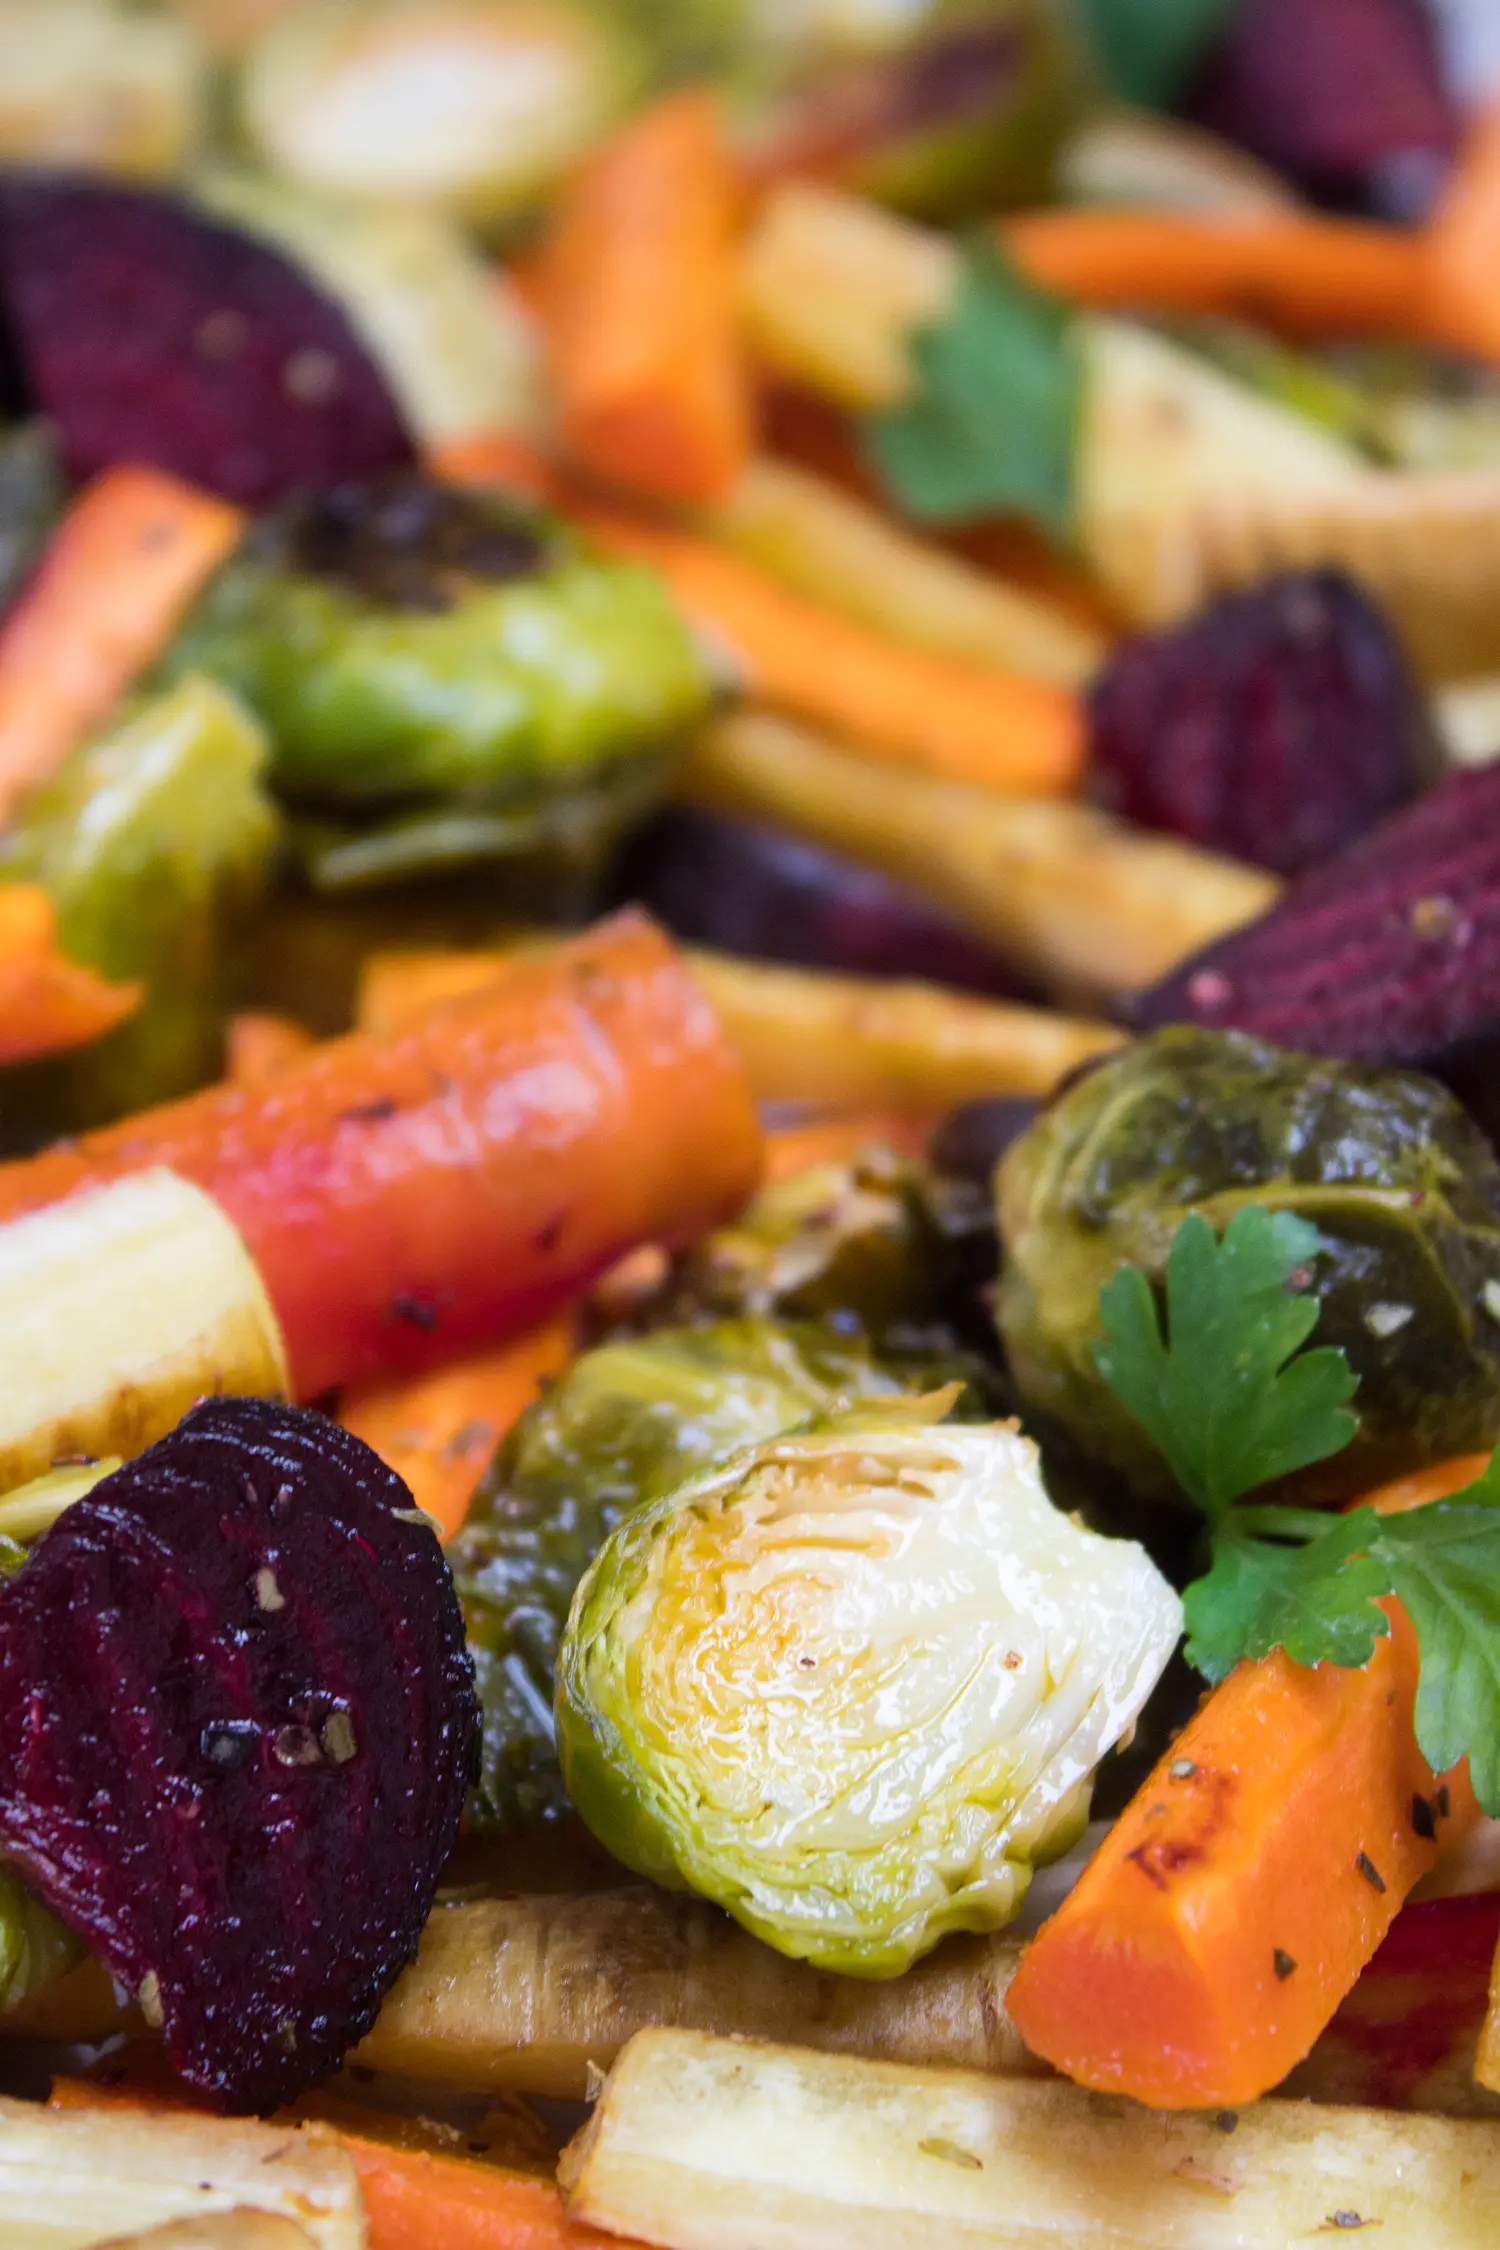 closeup image of roasted vegetable medley of beets carrots parsnips and brussel sprouts fresh out of the oven